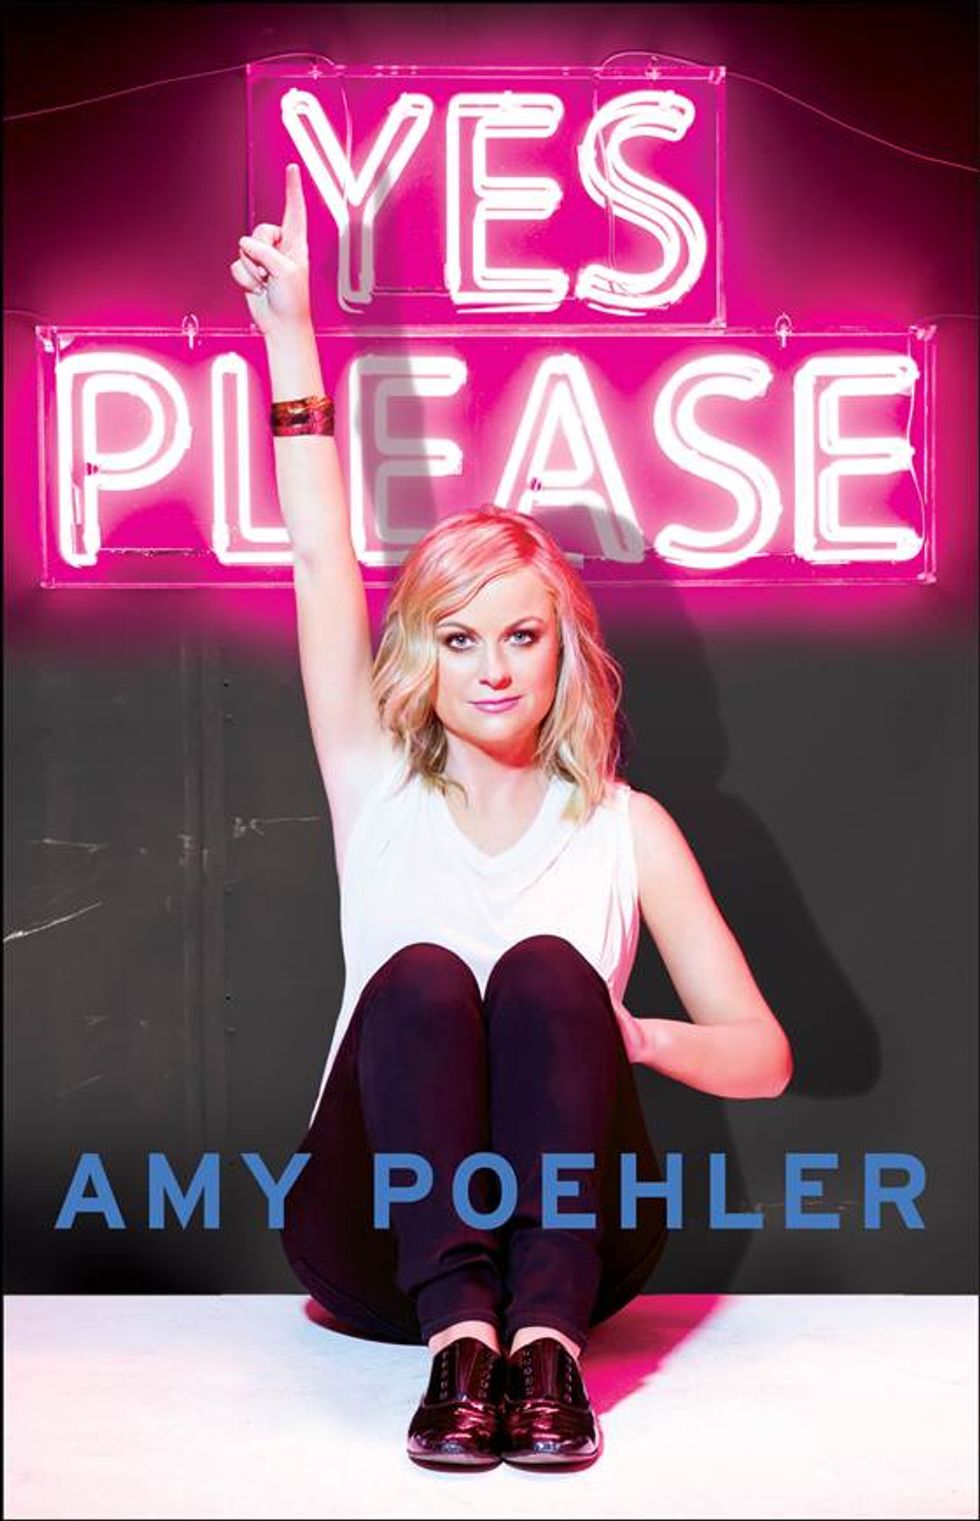 An Ode to Amy Poehler& Her New Book